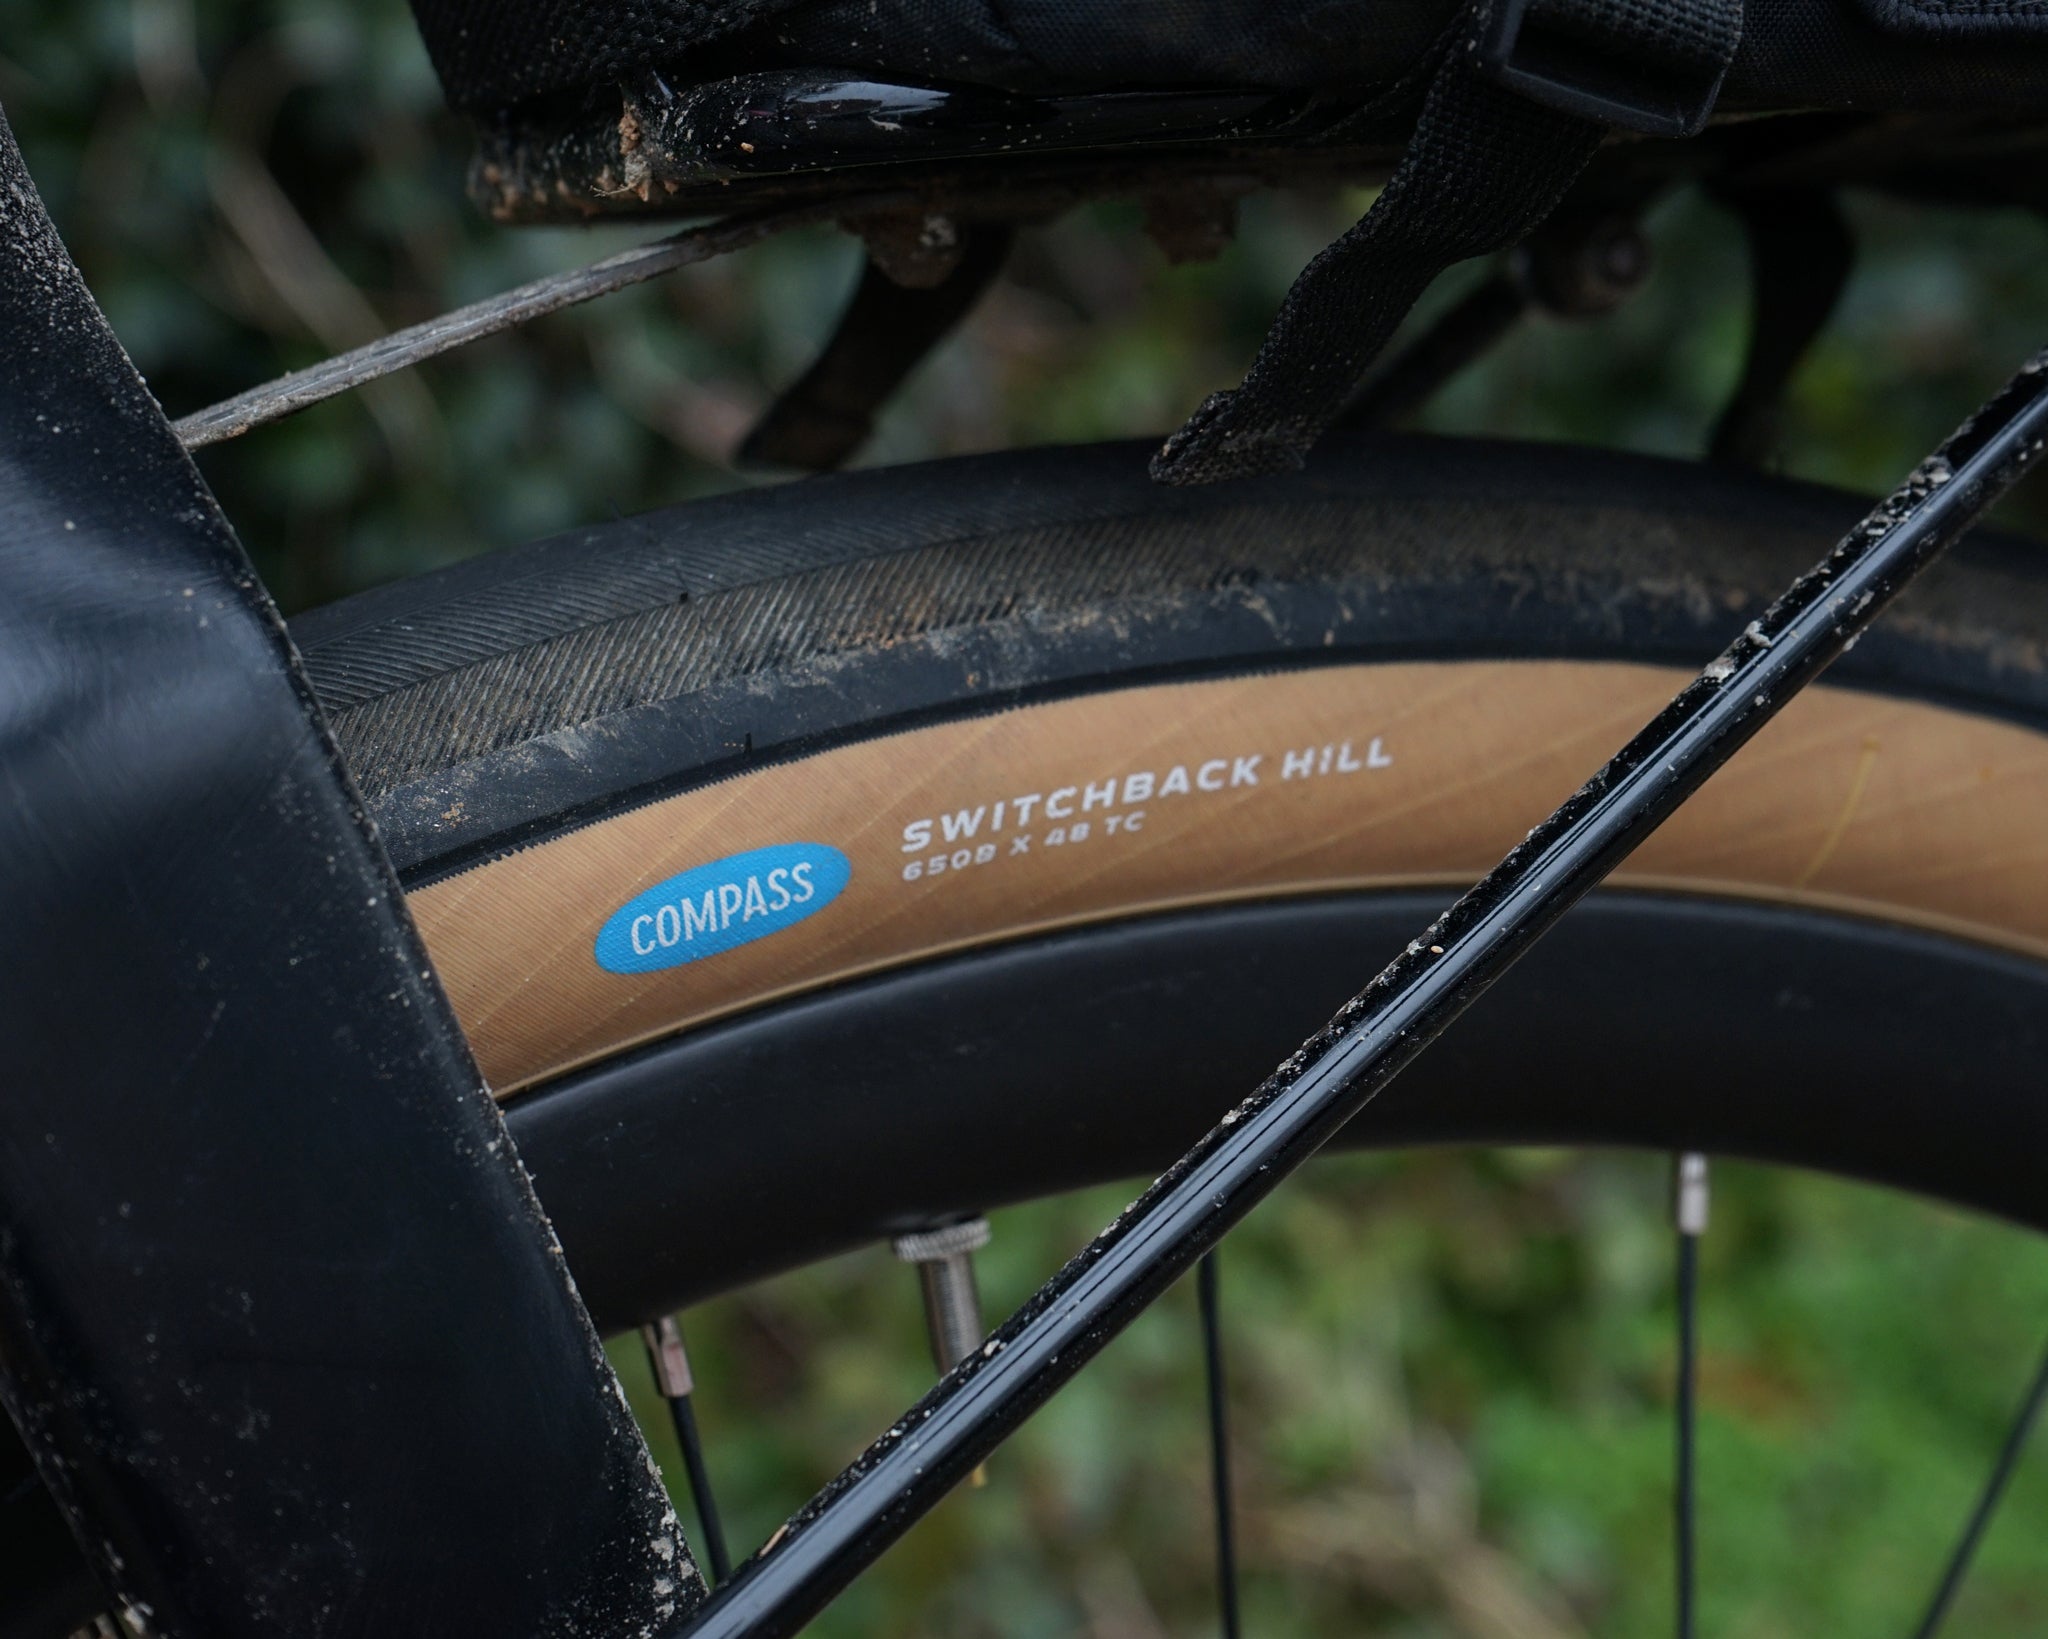 Compass Switchback Hill tire review